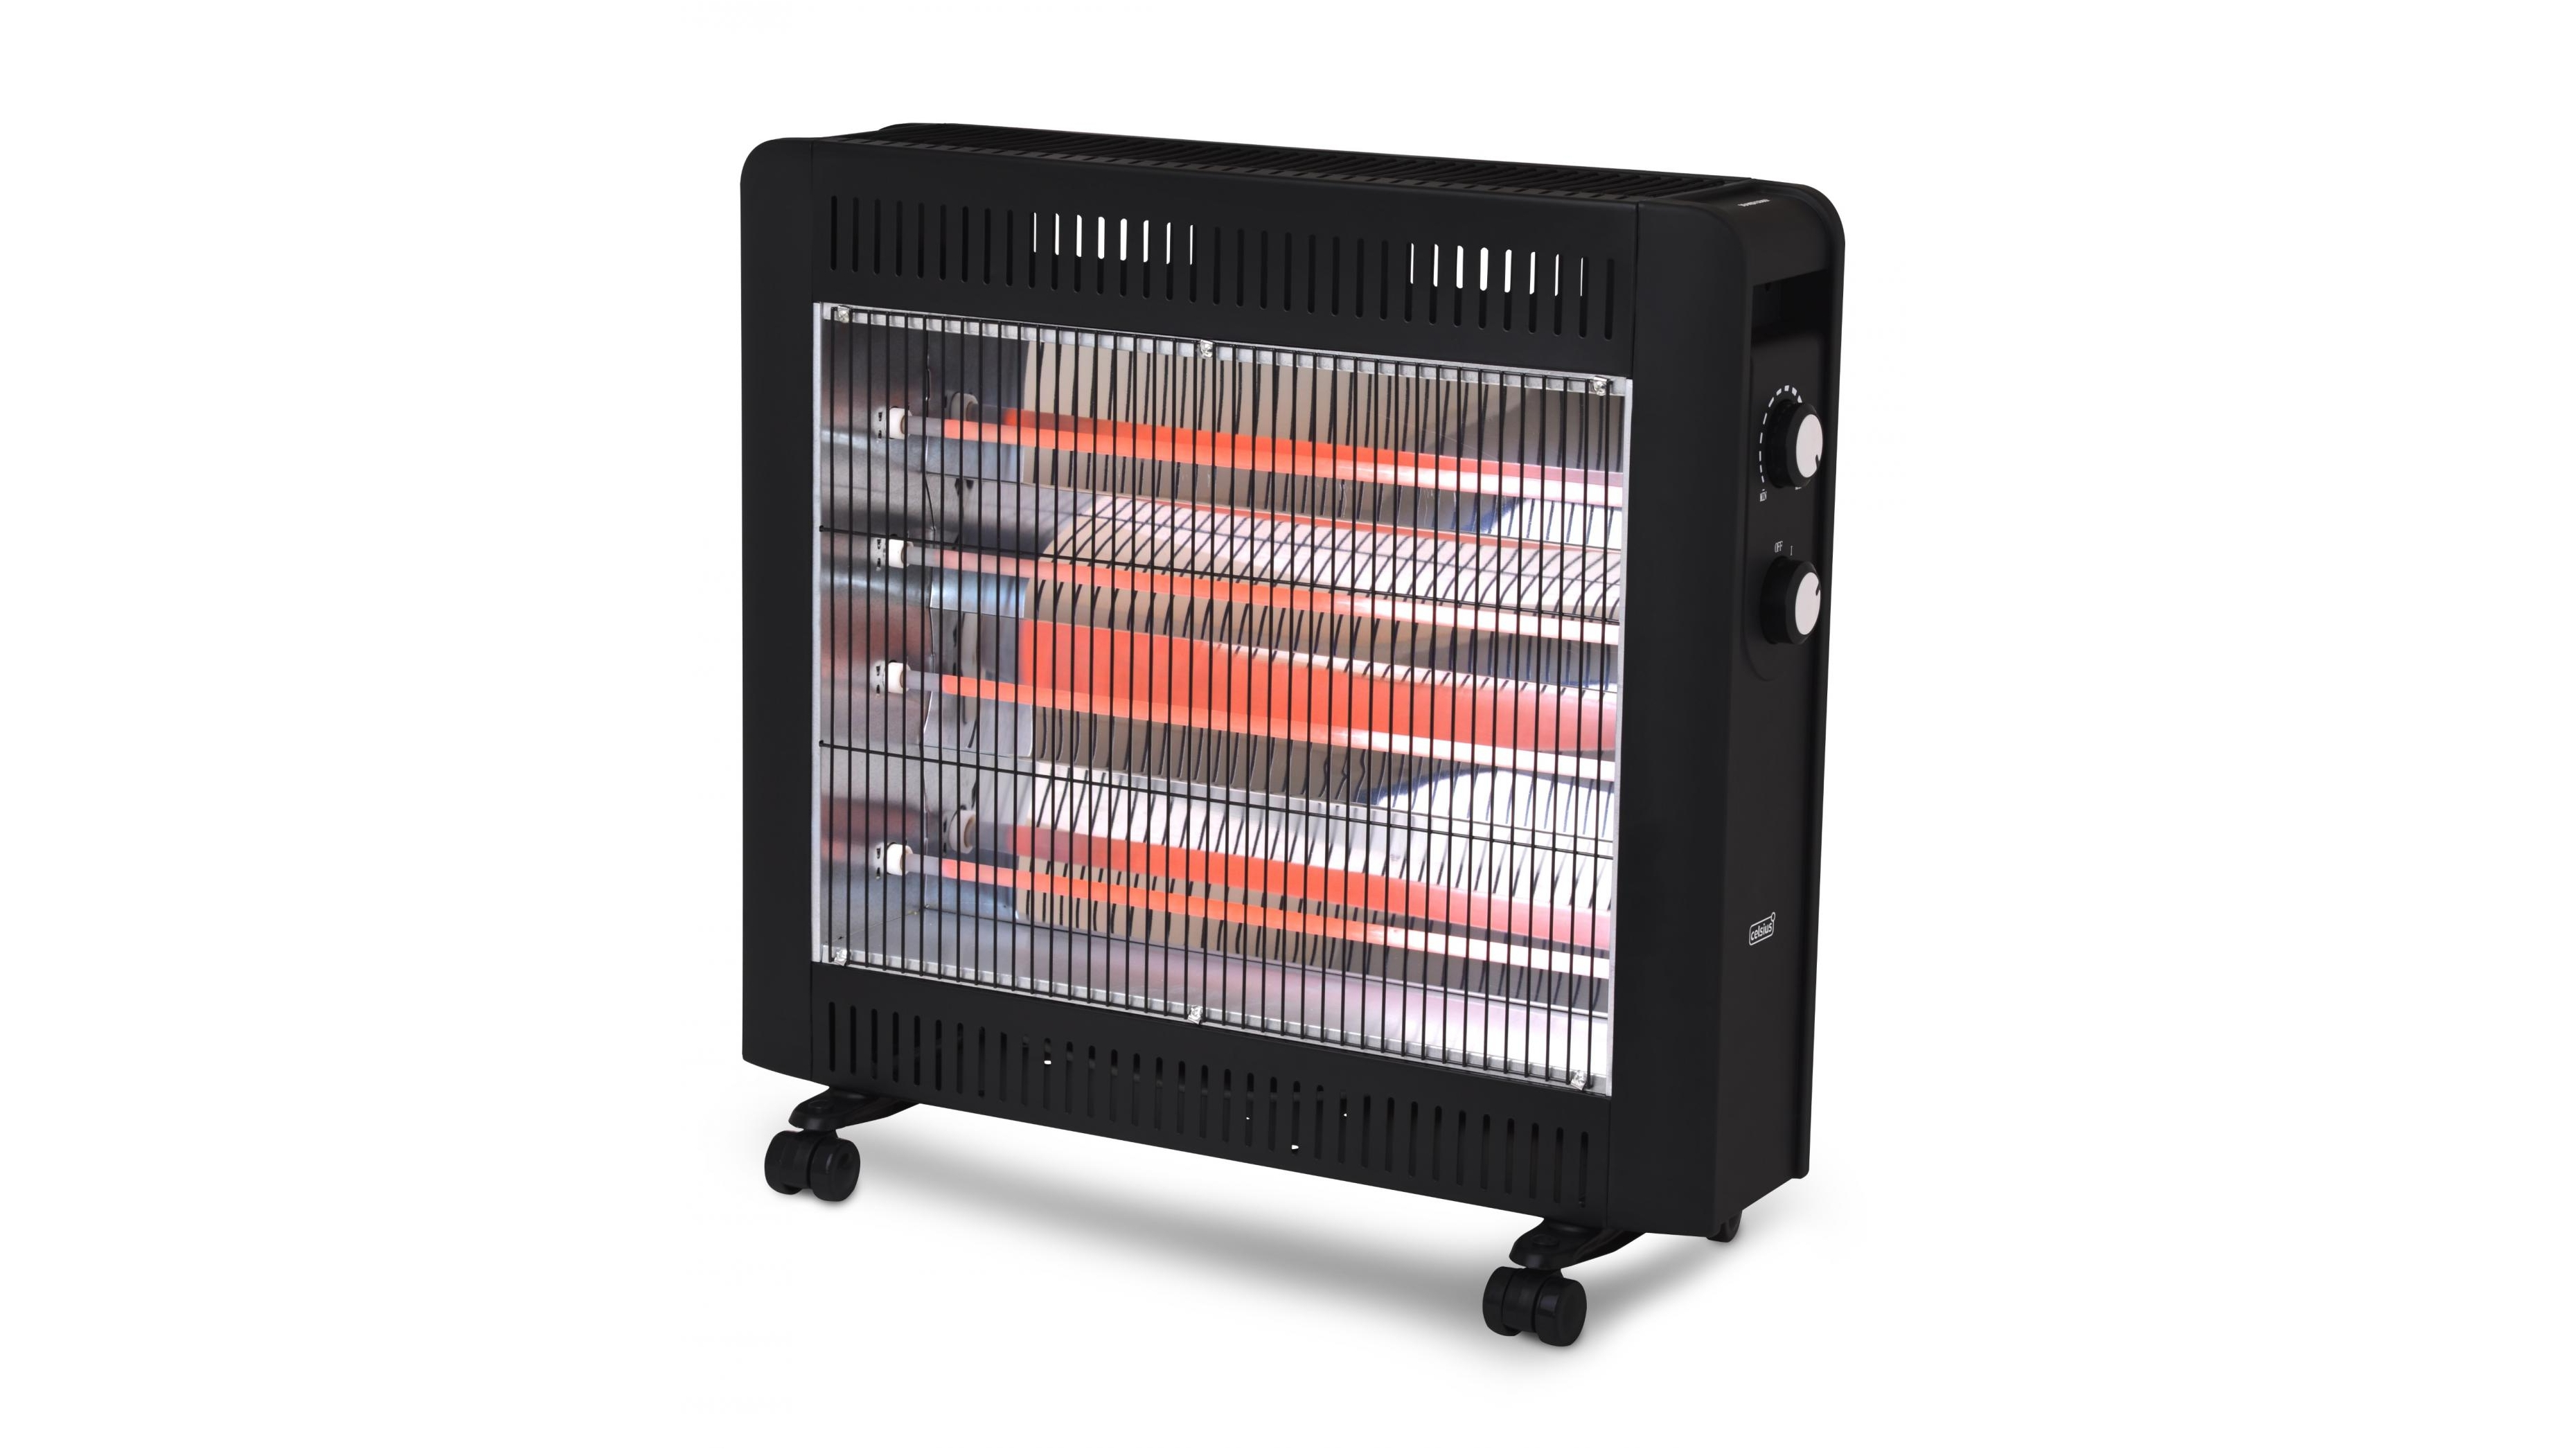 Goldair 4 Bar Radiant Heater with regard to dimensions 3719 X 2092